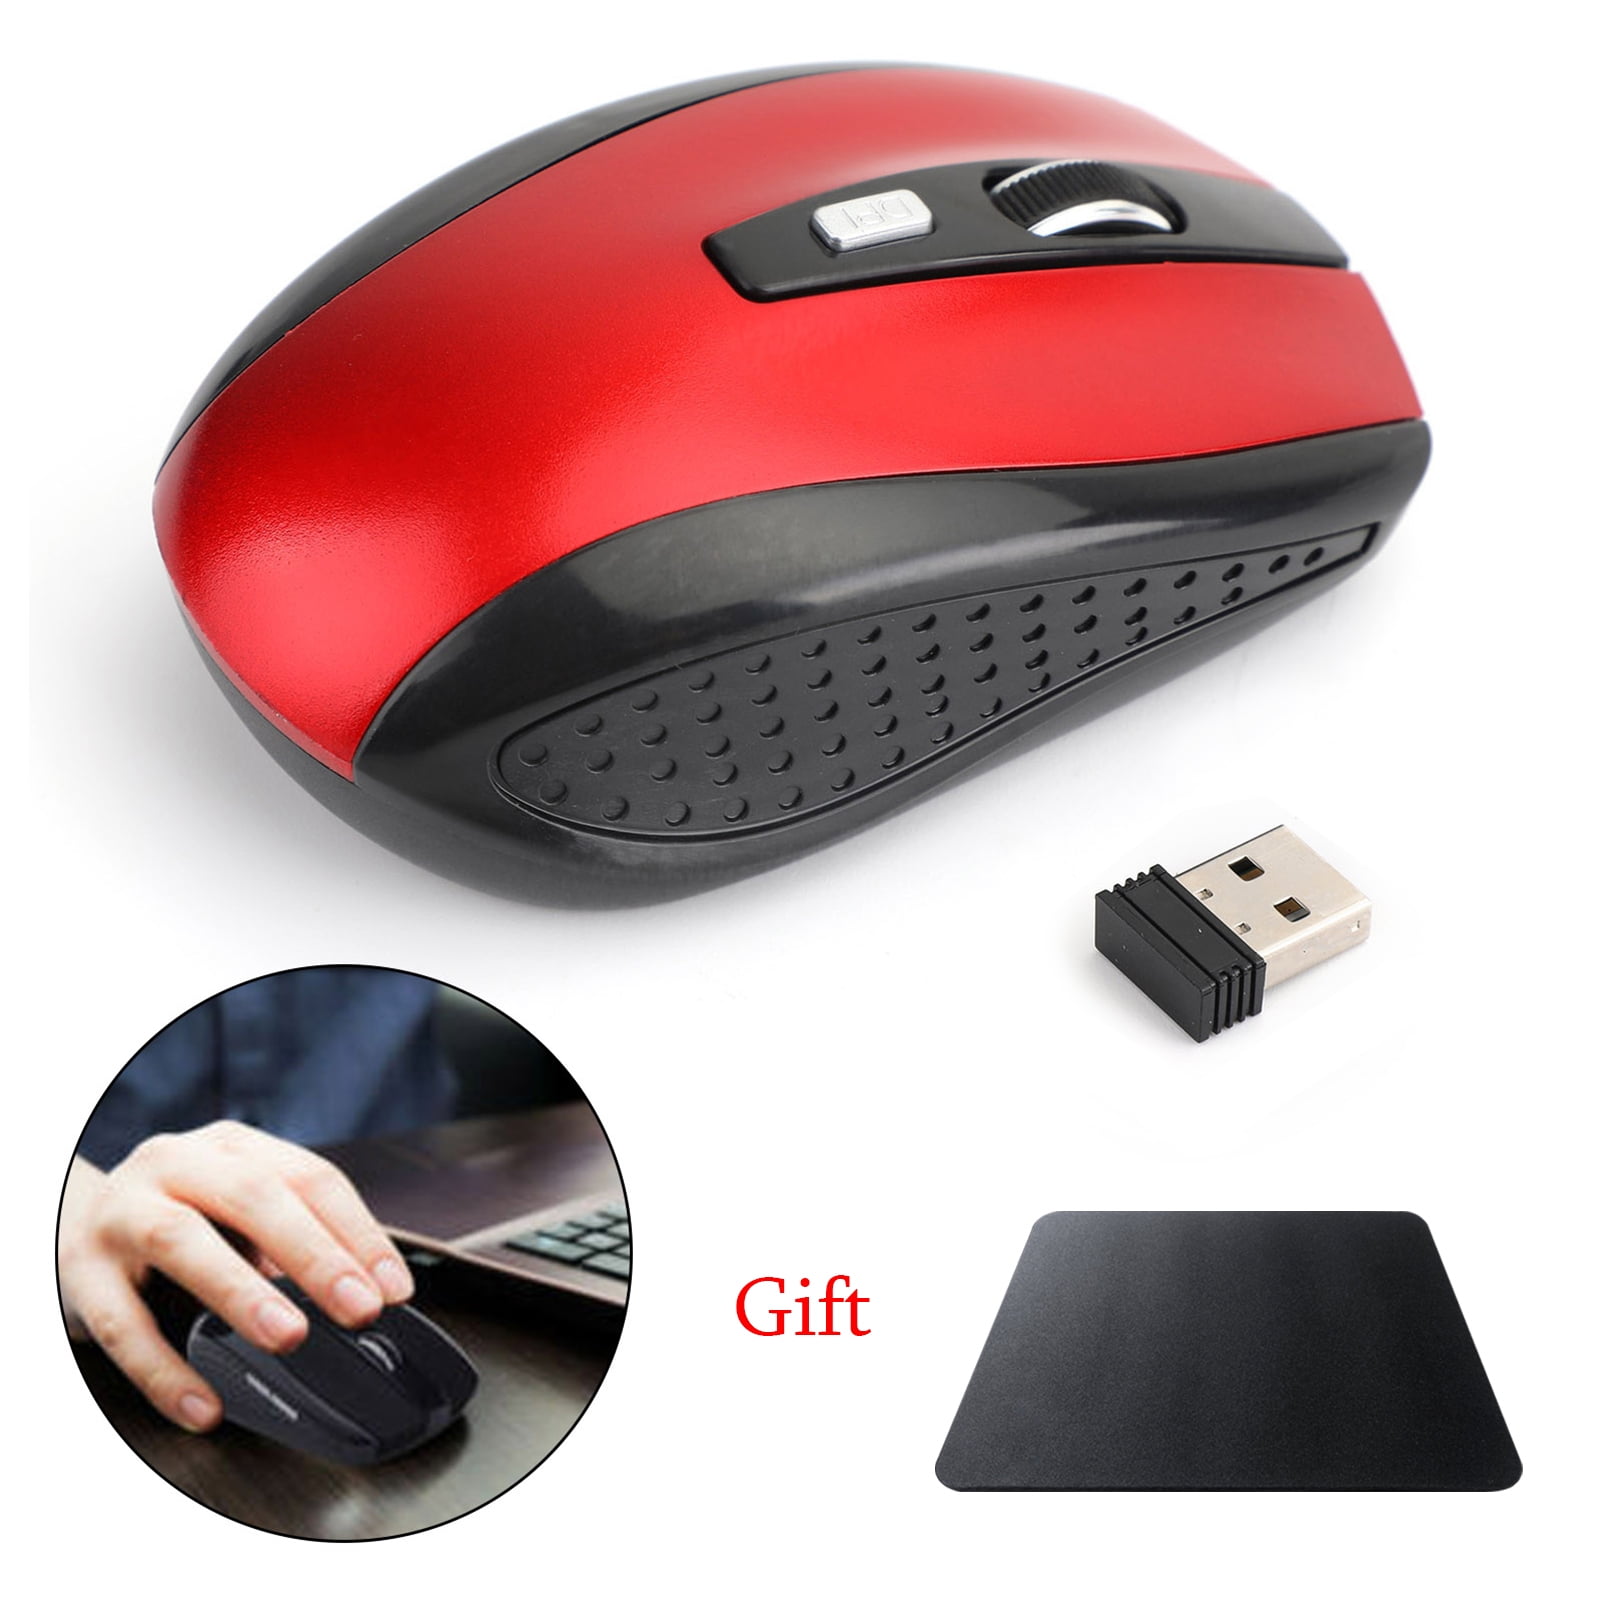 2.4GHz Wireless Optical Gaming Mouse Cordless Mice USB Receiver for PC Laptop 